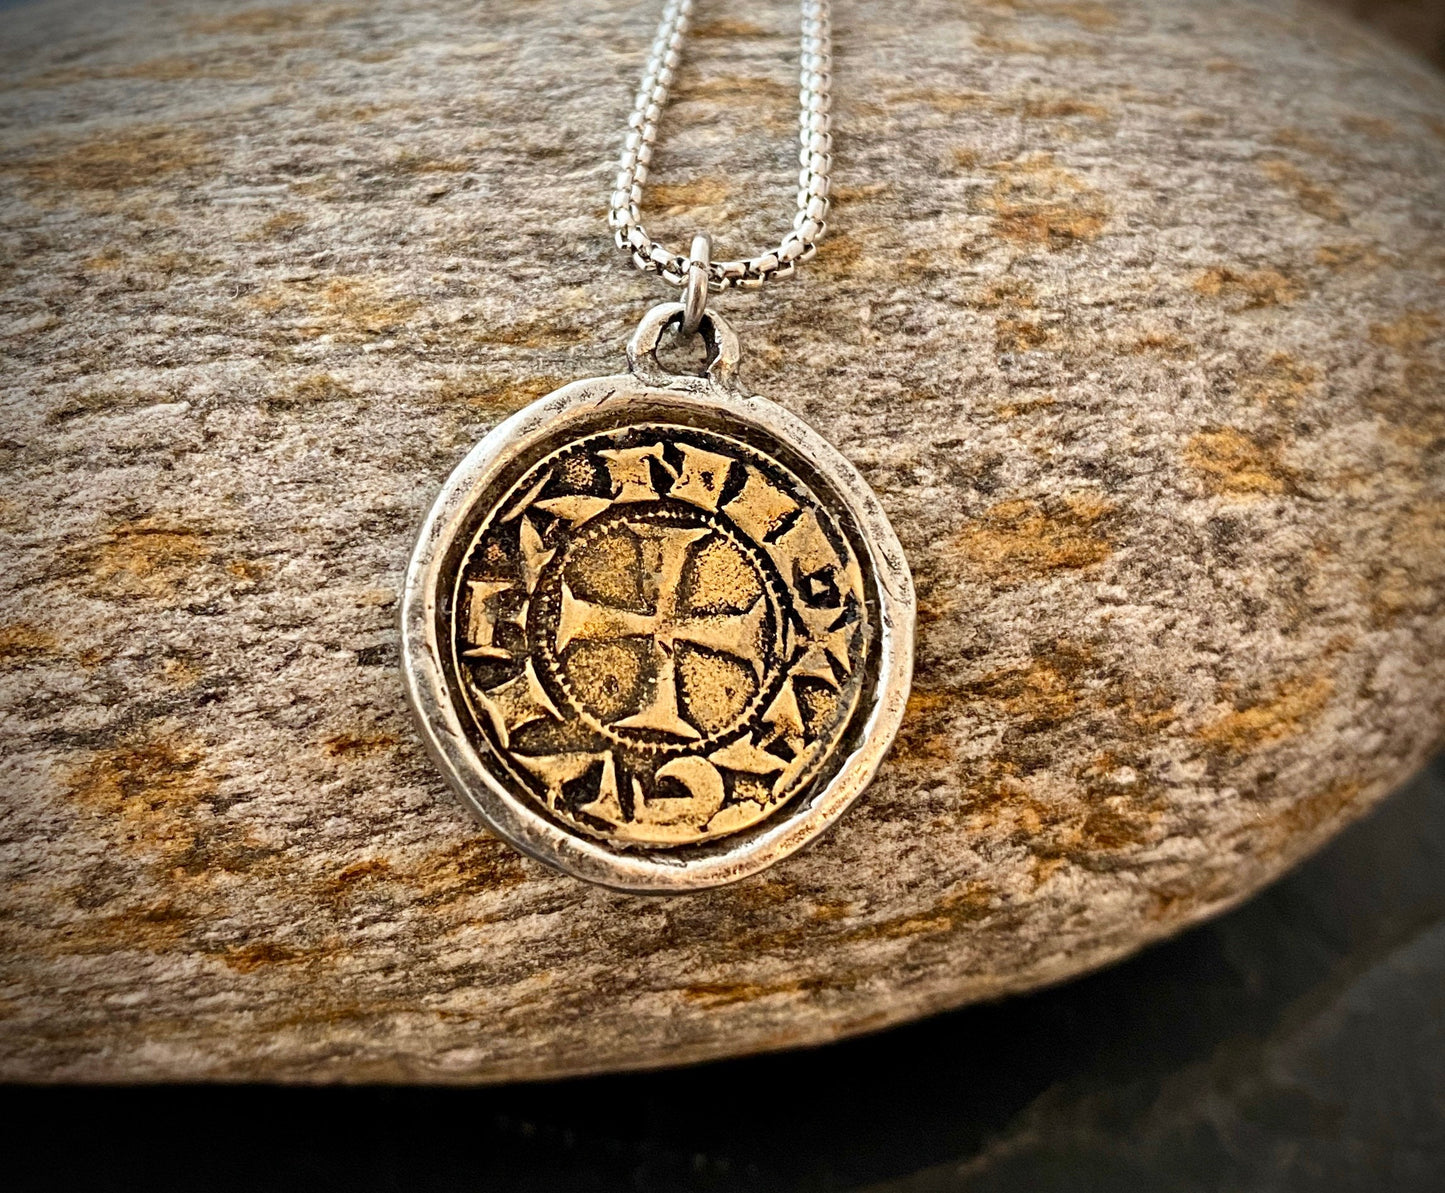 Old Spanish Coin Men's Necklace, Shipwreck Pirate Cross Pendant Brass Two Tone Mixed Medal, Unisex Jewelry, ST-030